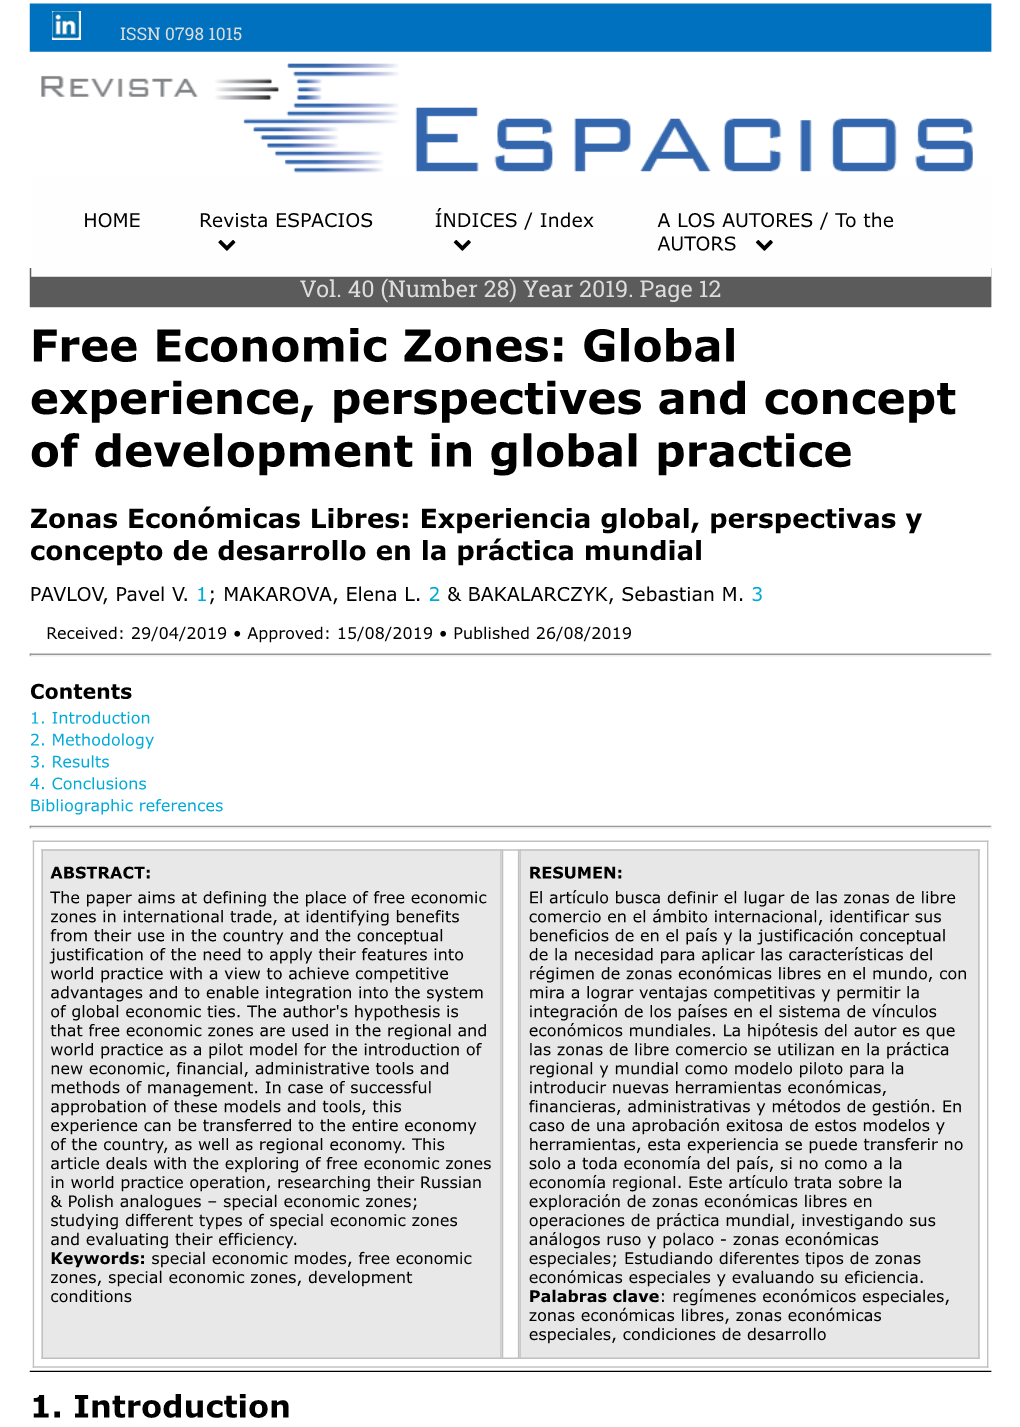 Free Economic Zones: Global Experience, Perspectives and Concept of Development in Global Practice